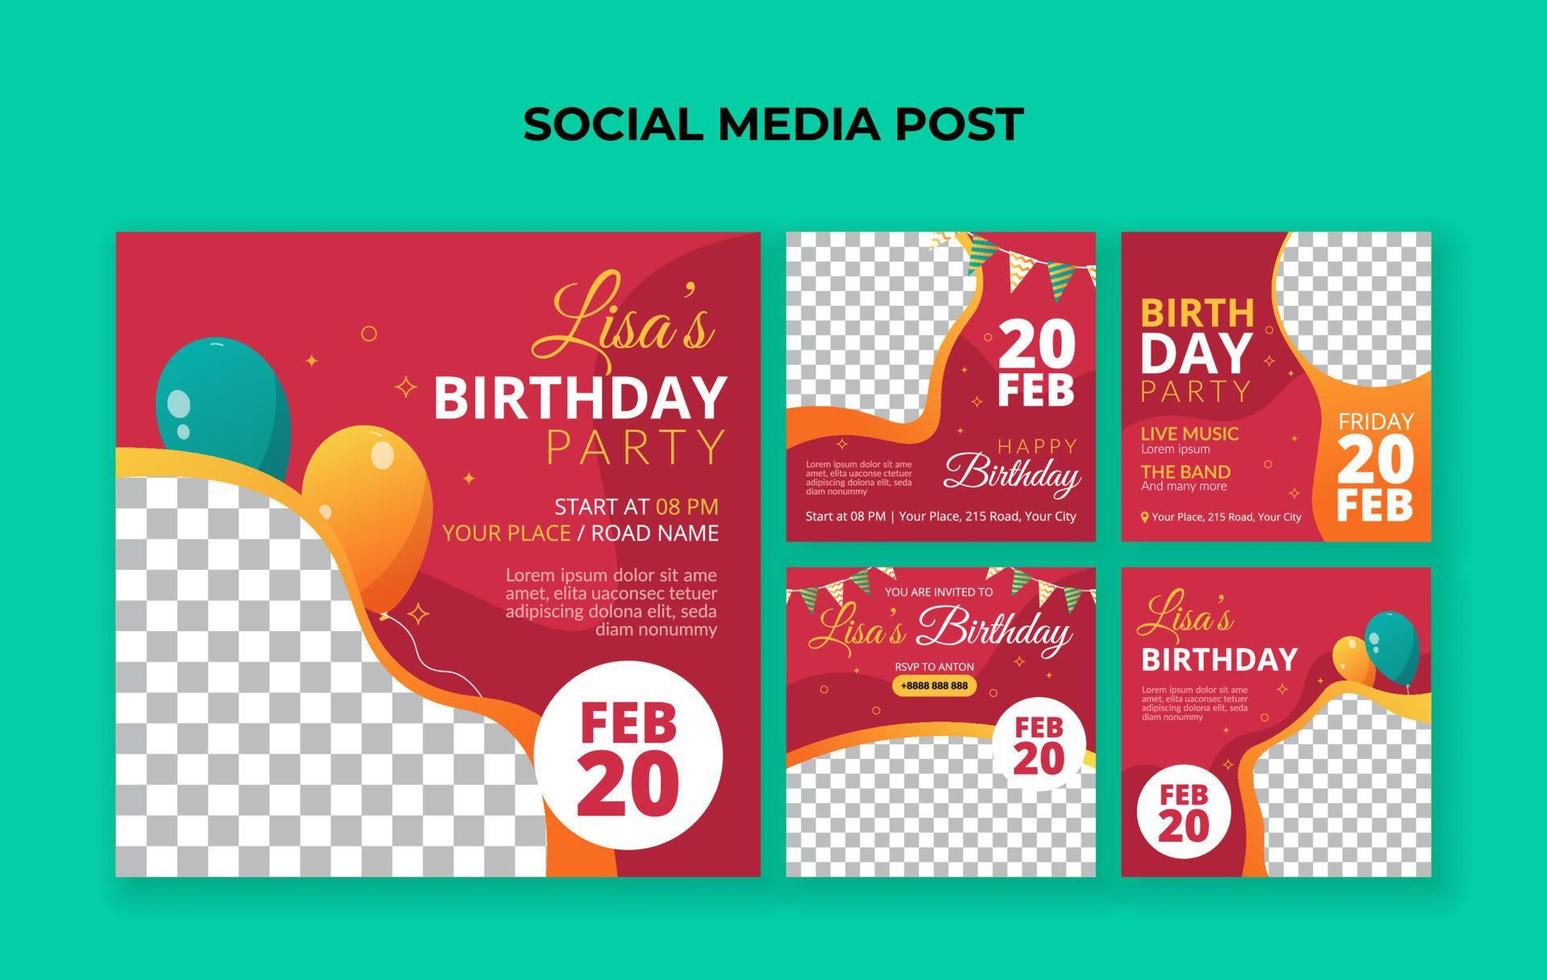 Birthday party social media post template. Suitable for birthday invitation and anniversary event vector